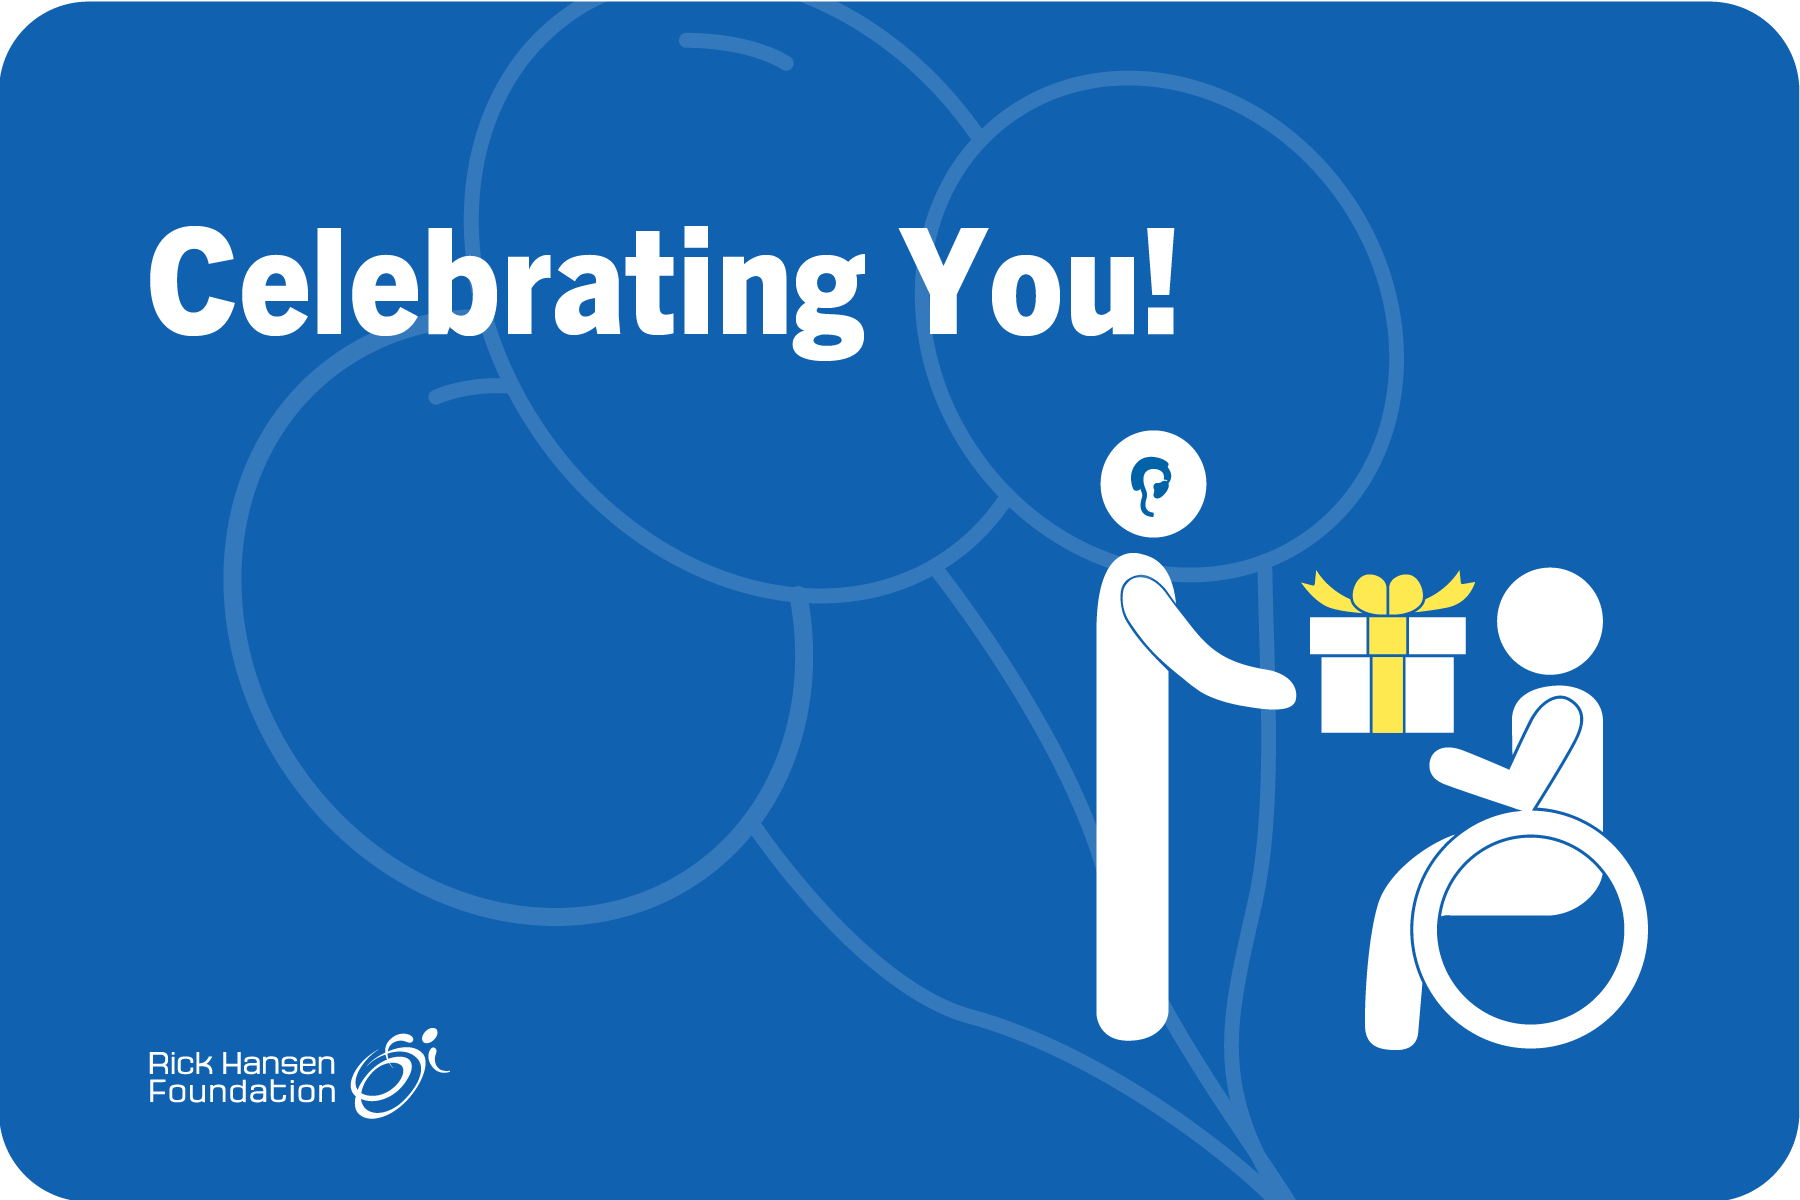 Blue background with transparent balloons in the background. White text reads “Celebrating you!” A white graphic of a person with a hearing aid is handing a present to another white graphic of a person using a wheelchair. The Rick Hansen Foundation logo is in the bottom left corner.